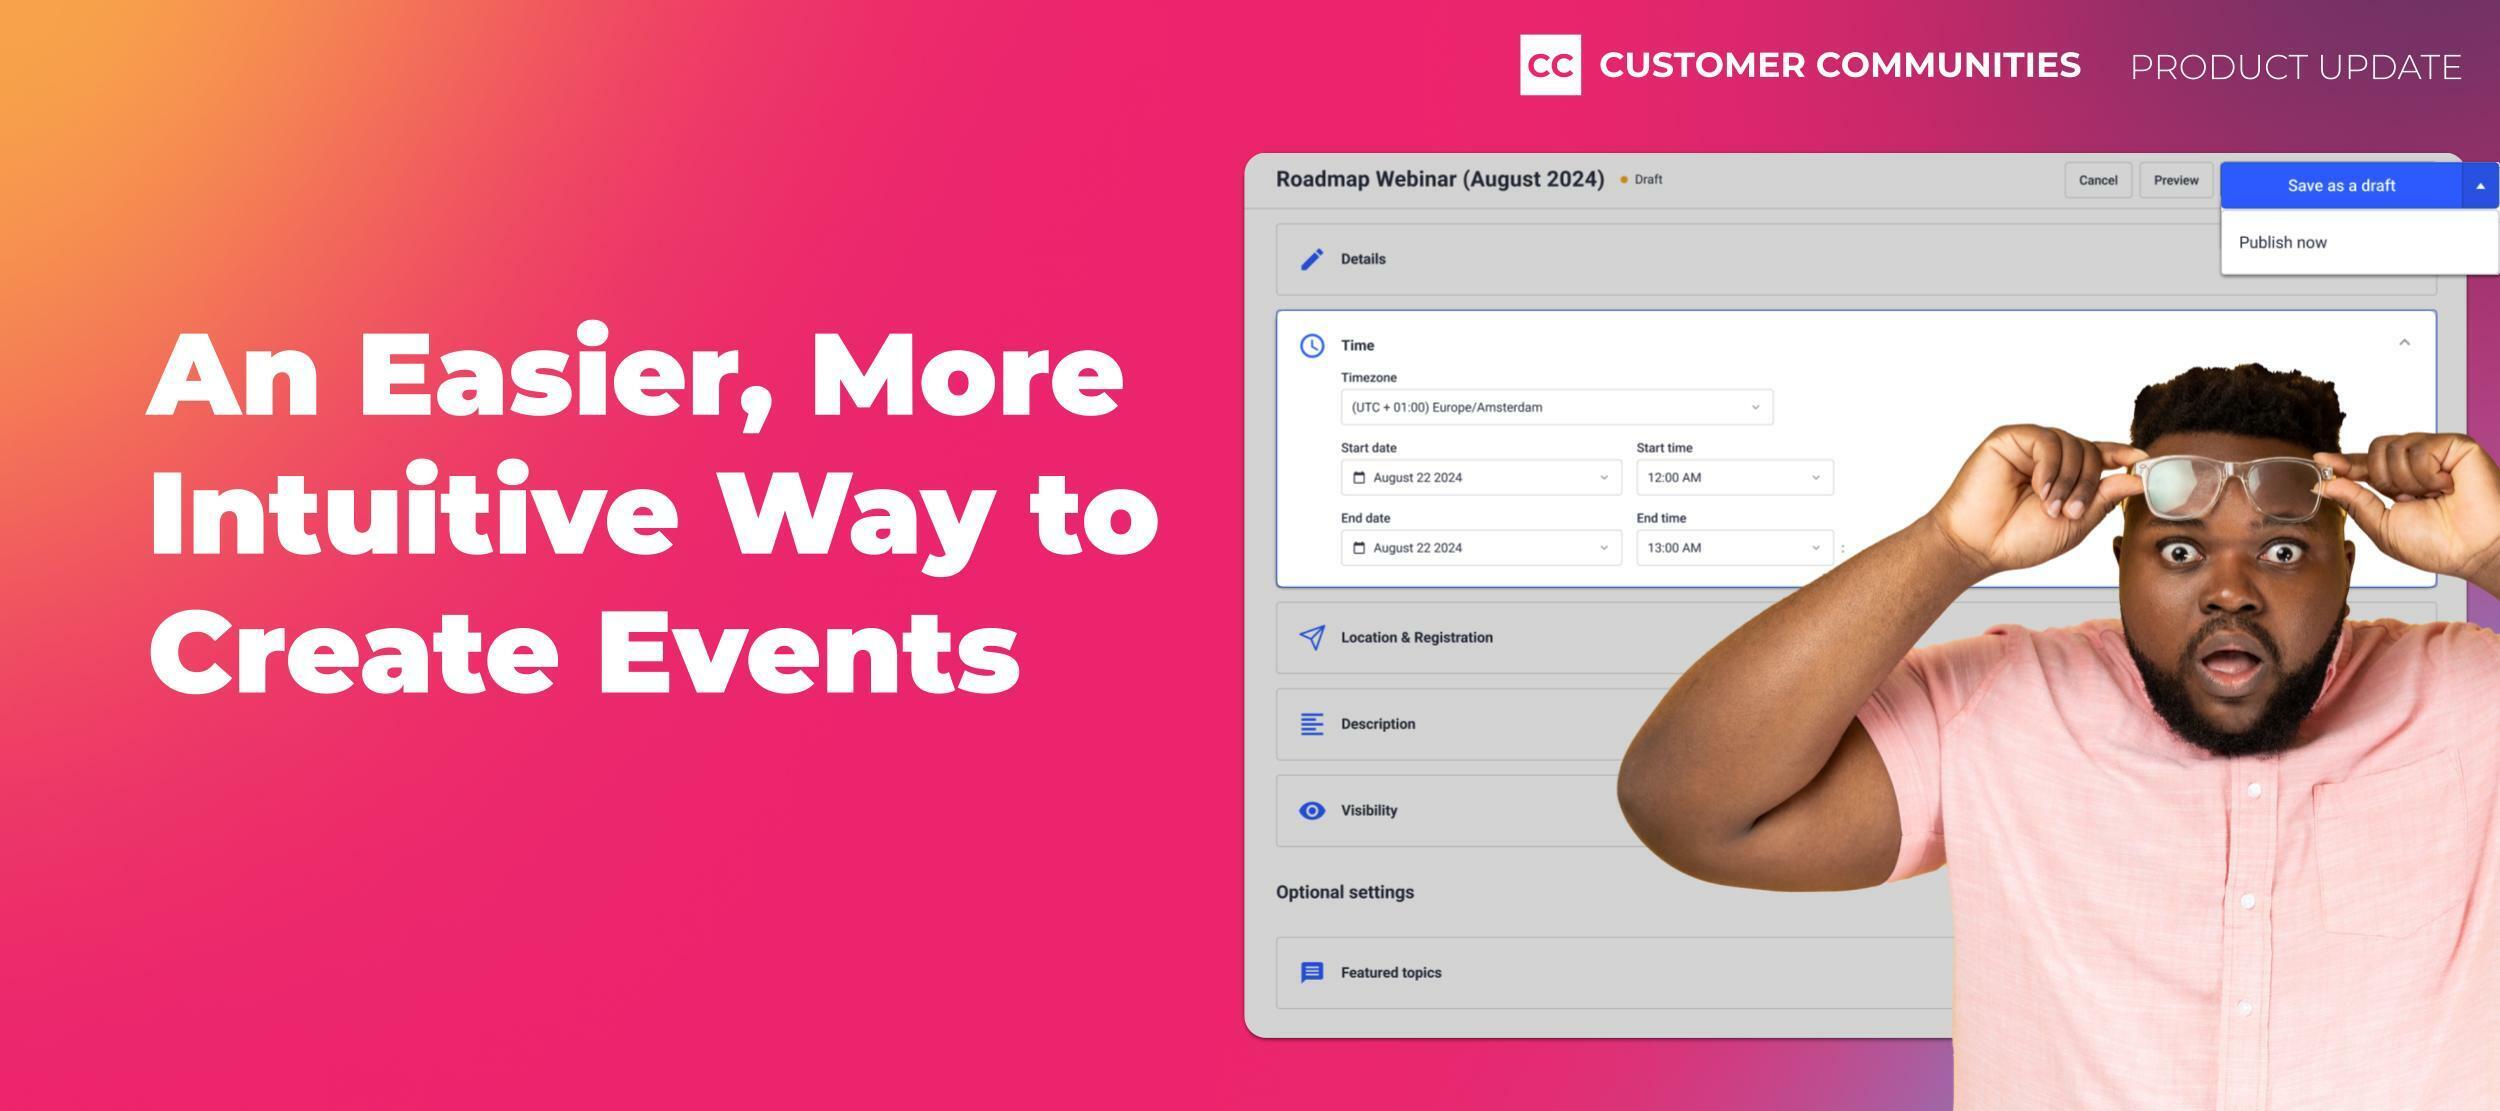 An Easier, More Intuitive Way to Create Events